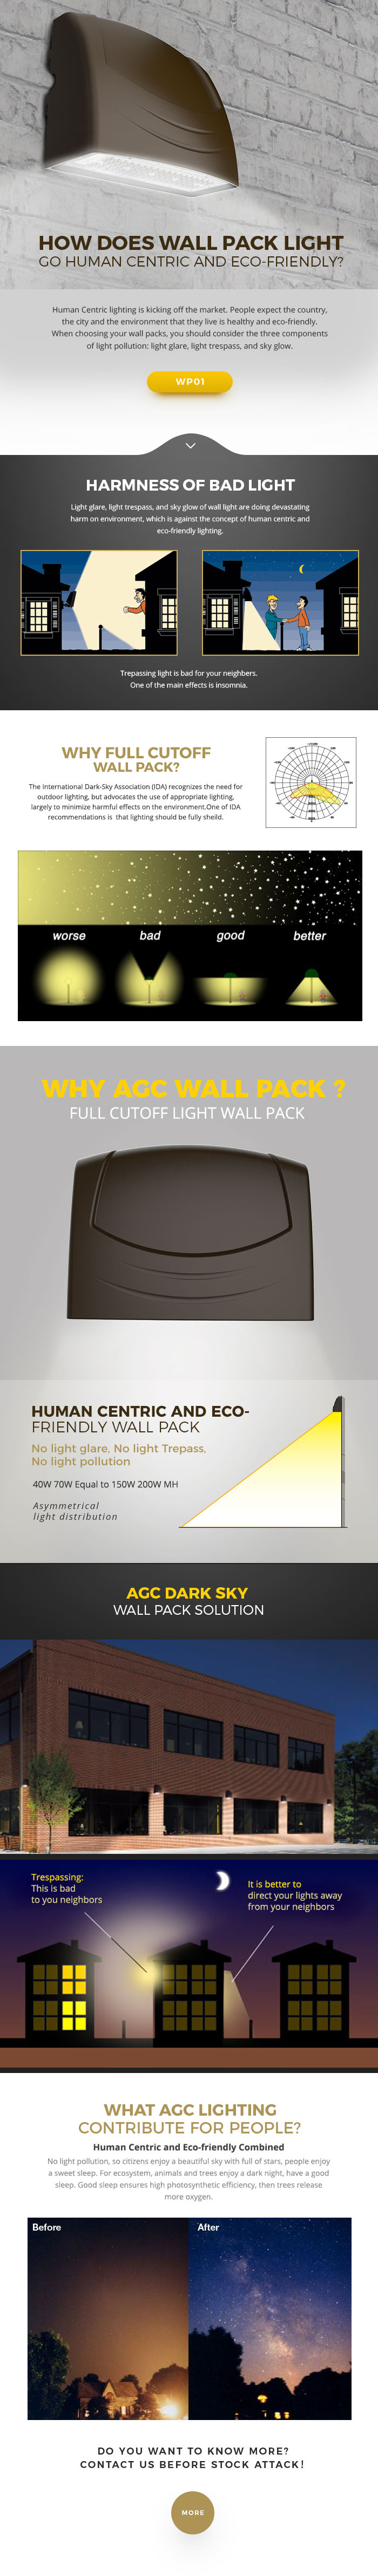 WP01 LED wall pack light human centric eco friendly